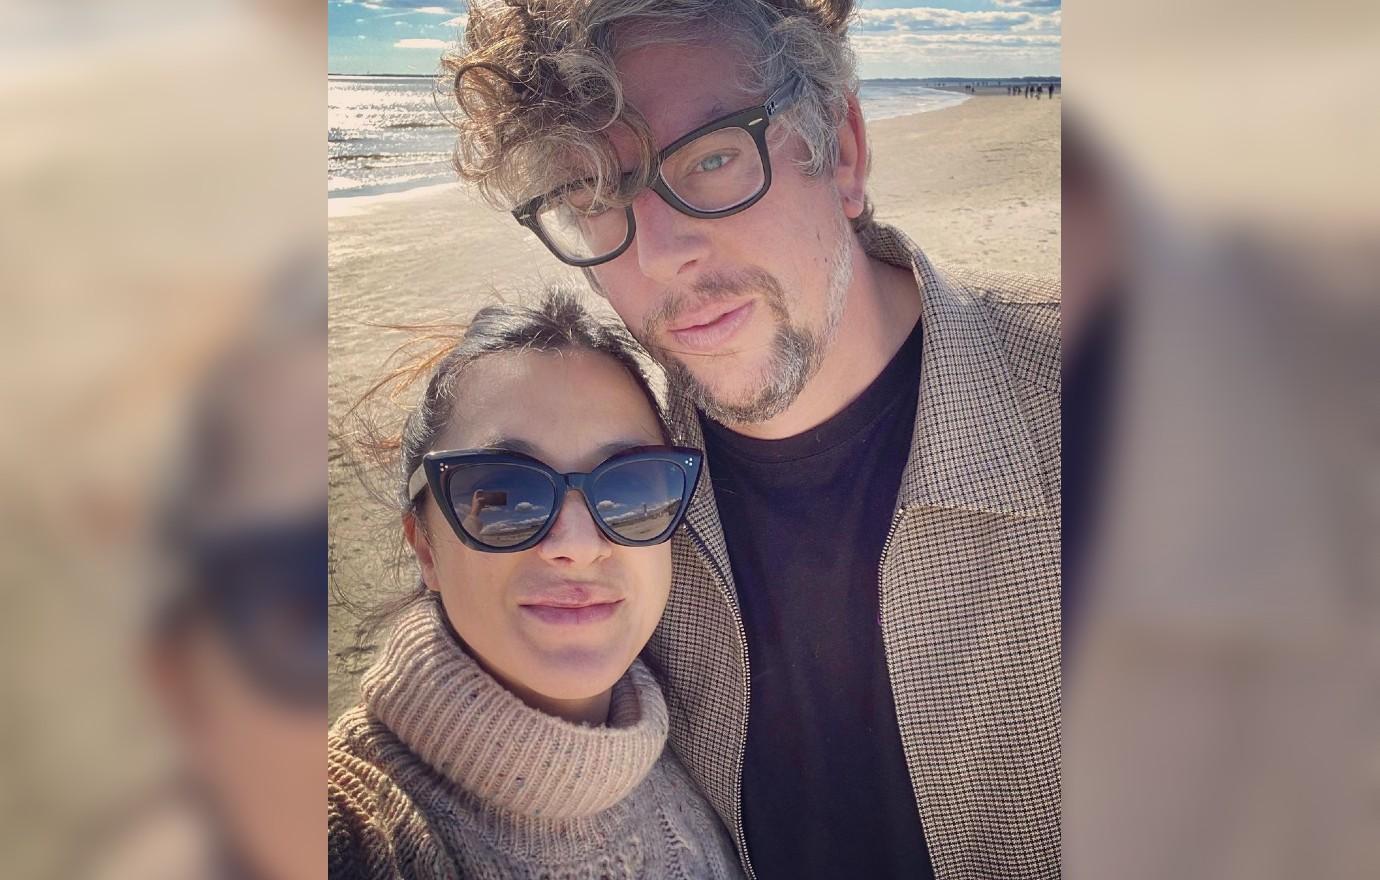 Michelle Branch, Patrick Carney Separating After 3 Years of Marriage